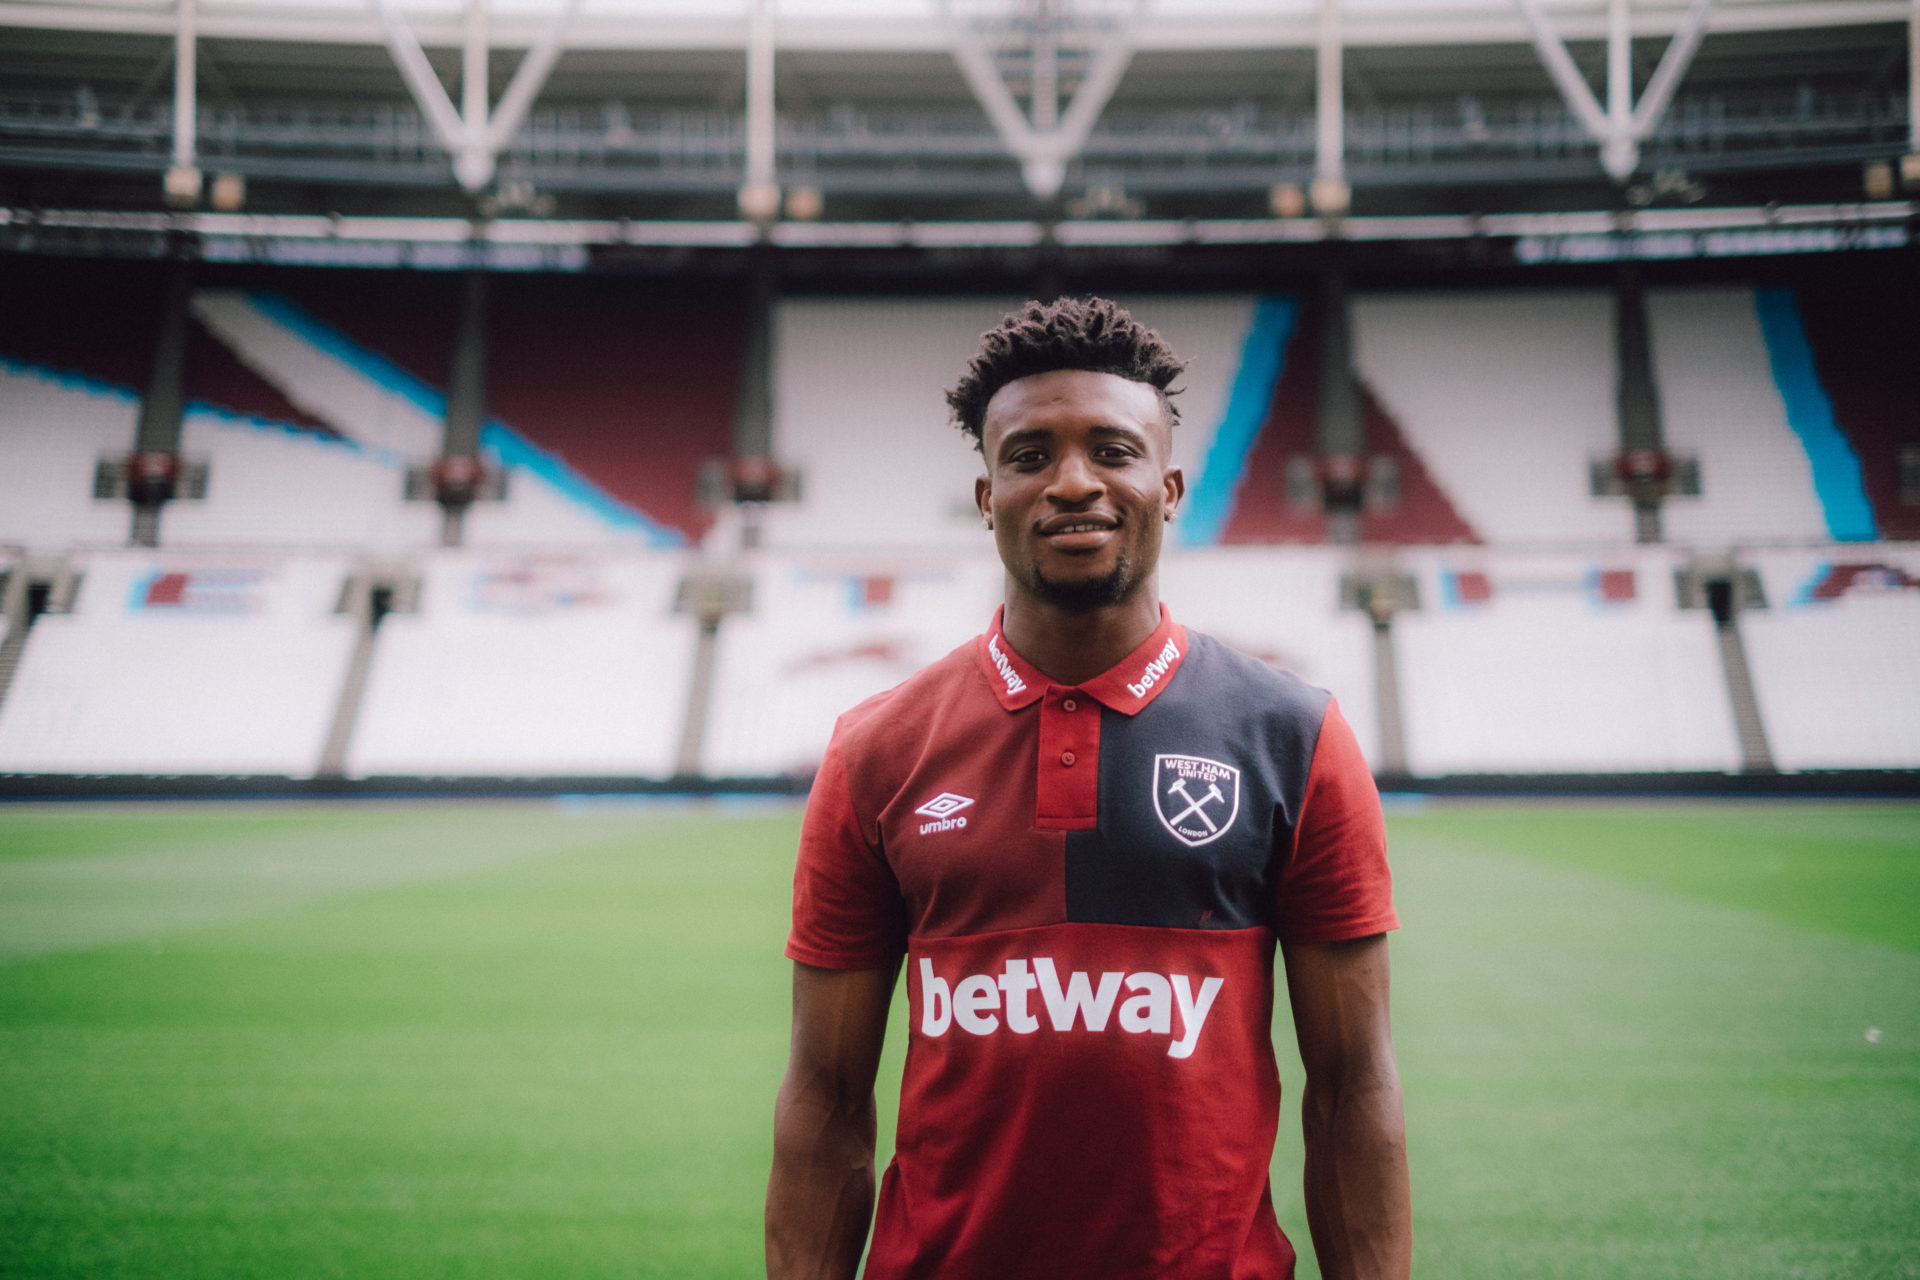  Mohammed Kudus, a midfielder for West Ham, poses for a photo at the London Stadium.